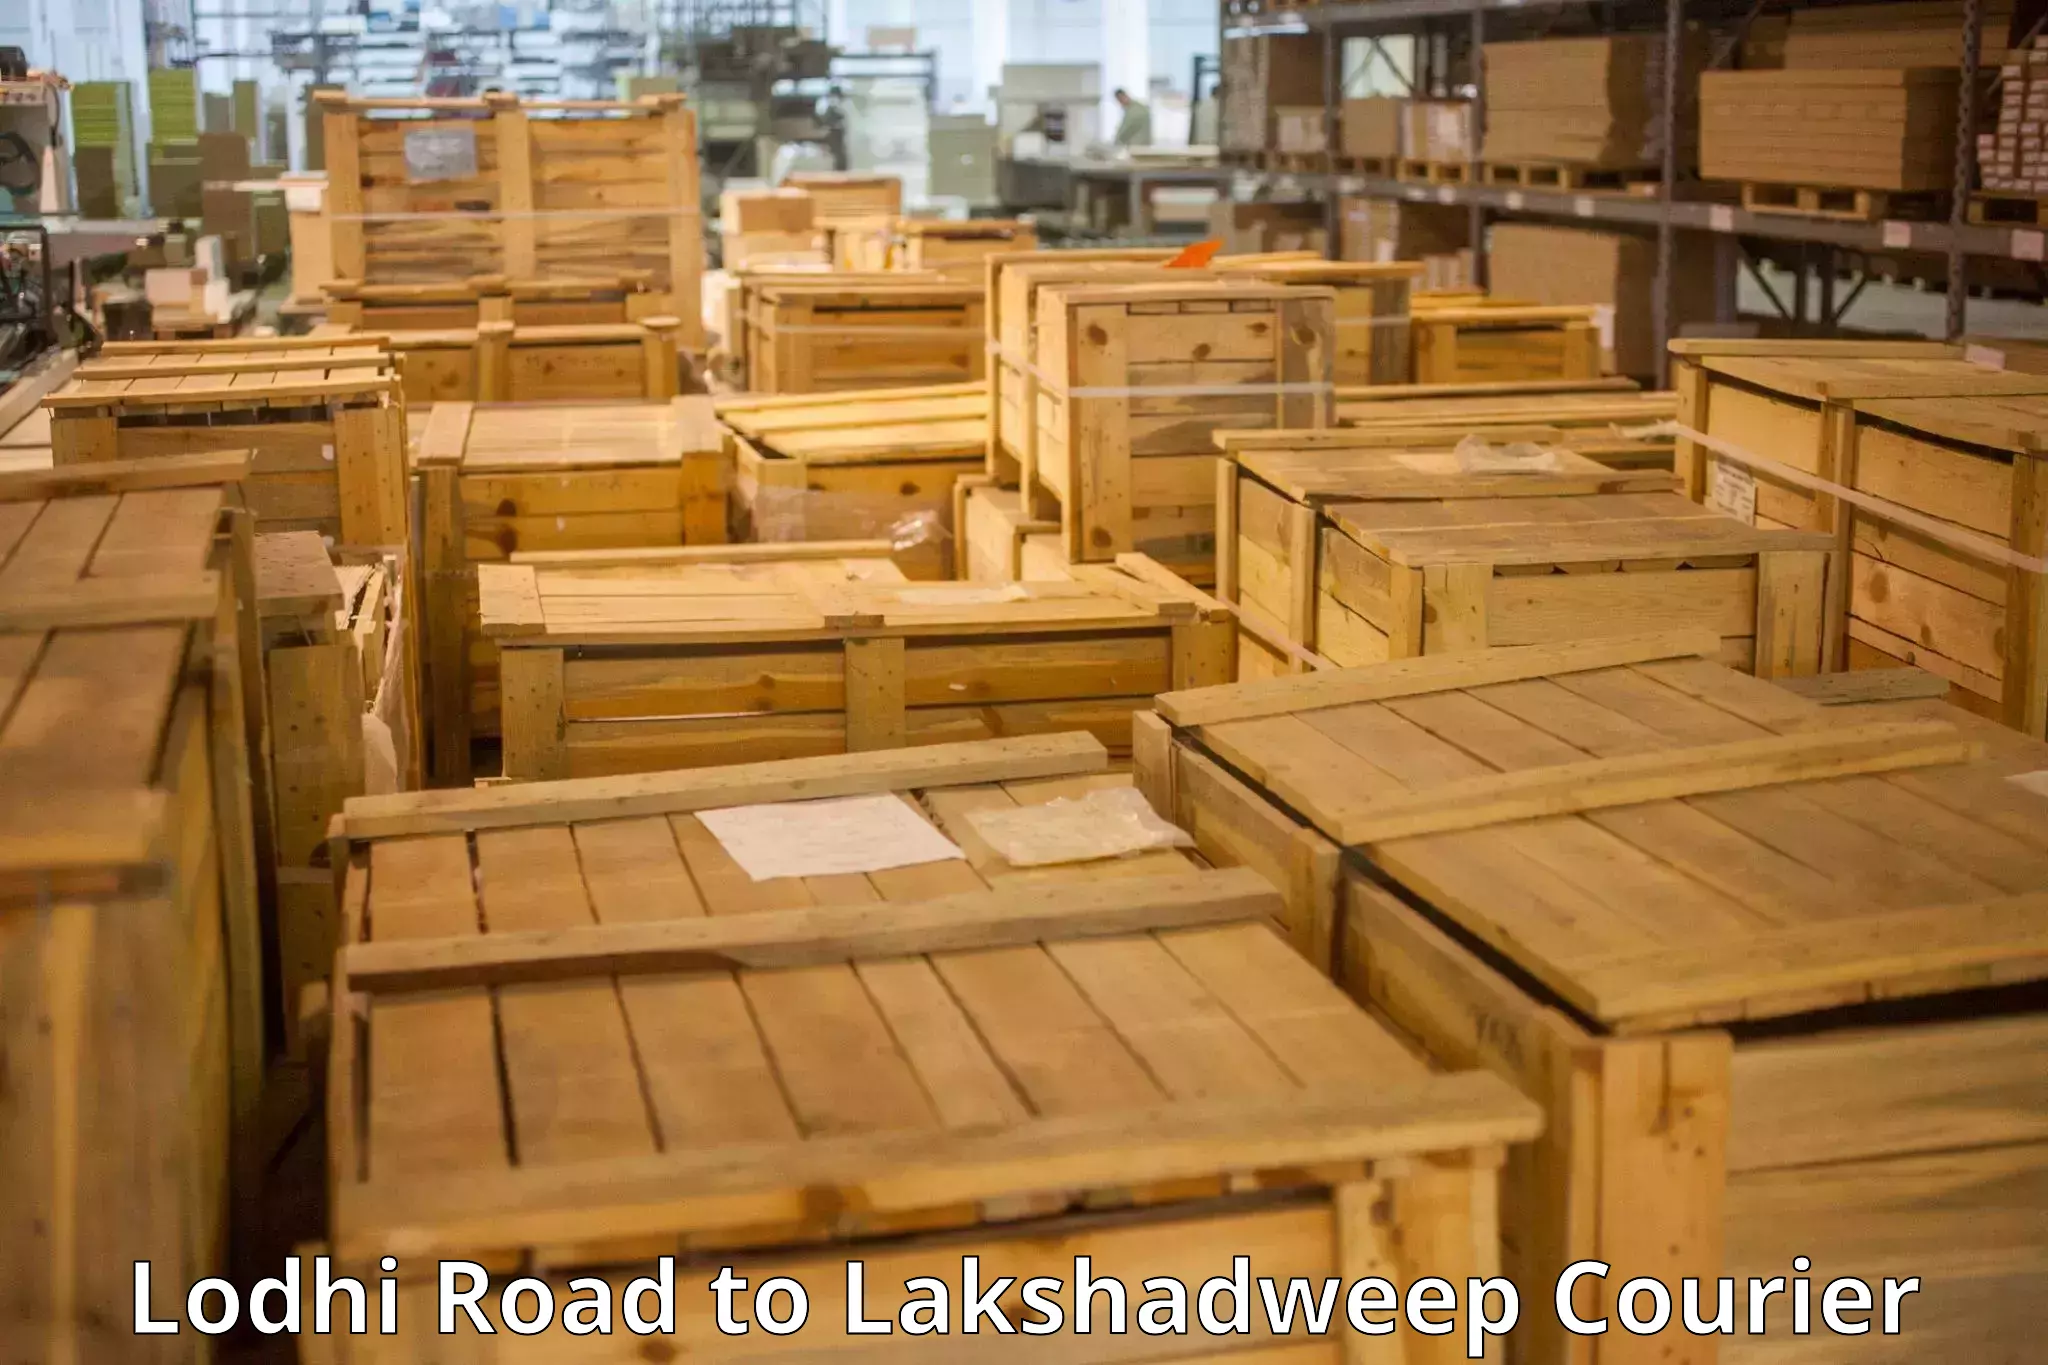 Baggage delivery technology Lodhi Road to Lakshadweep